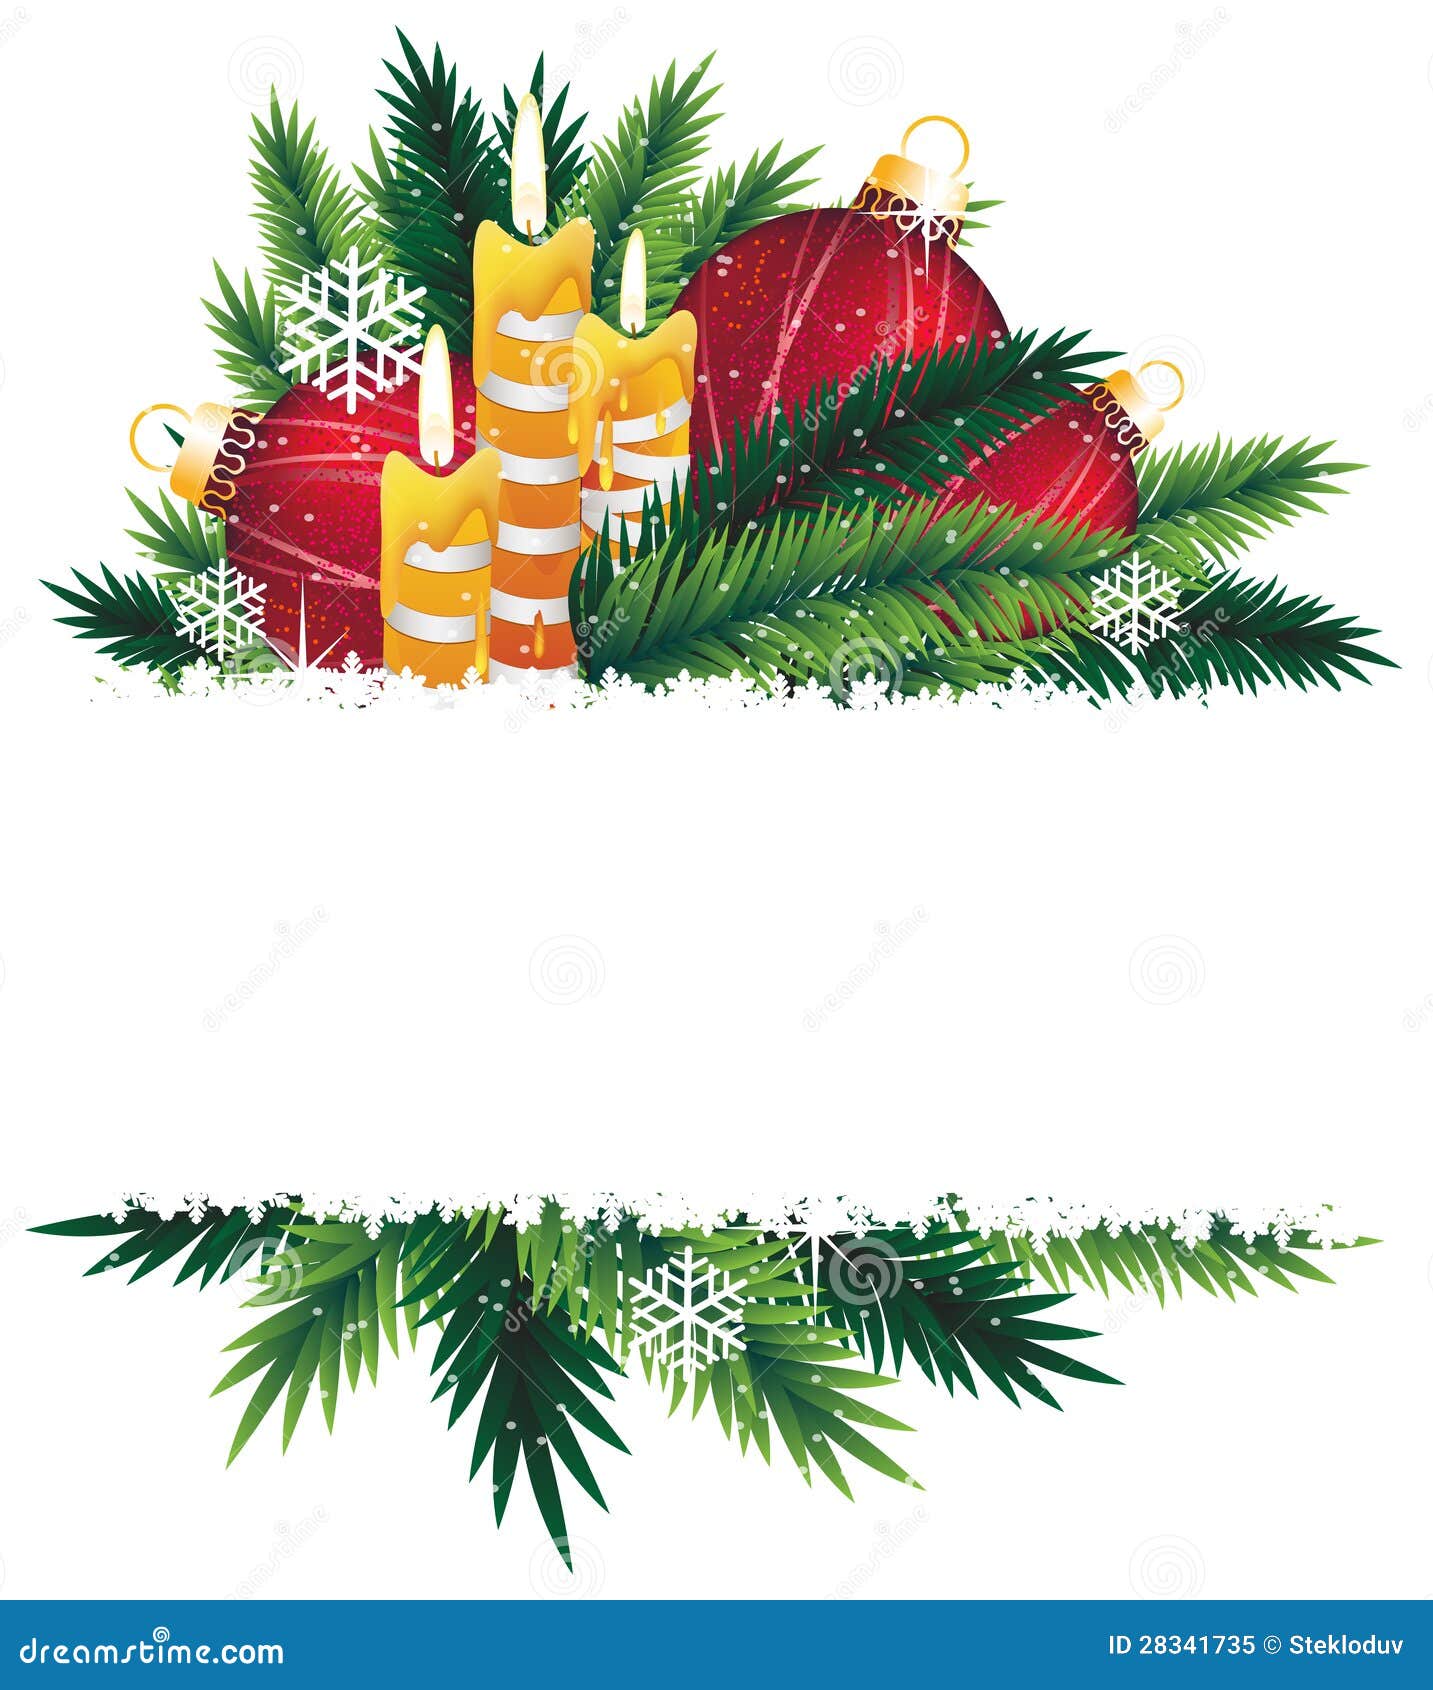 Christmas Decorations And Pine Tree Branches. Royalty Free Stock Photo - Image: 28341735